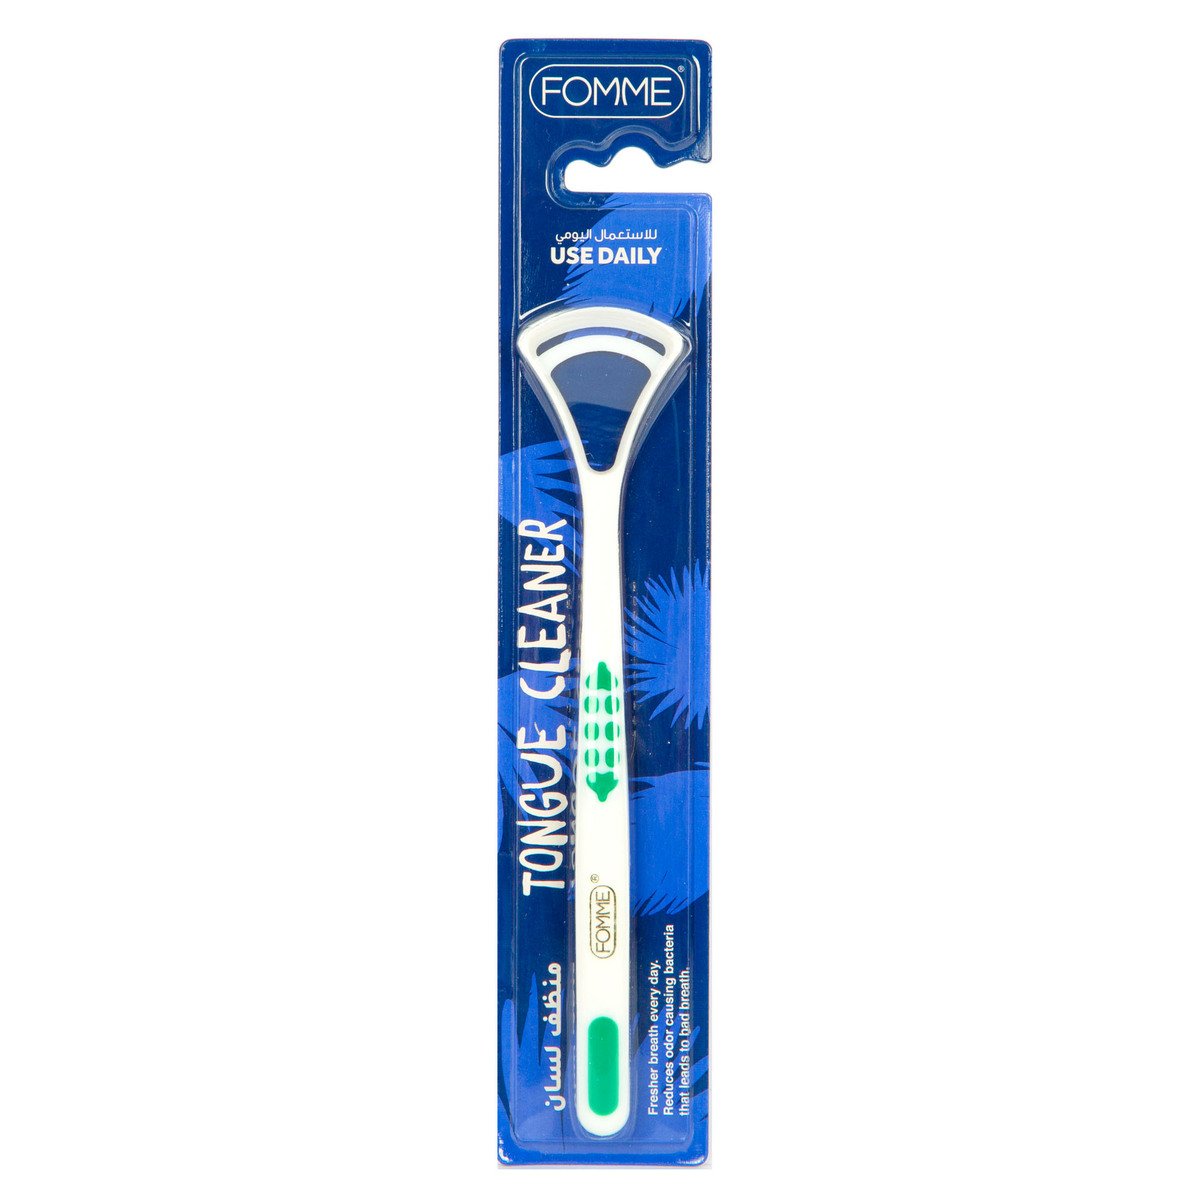 Fomme Tongue Cleaner 1 pc